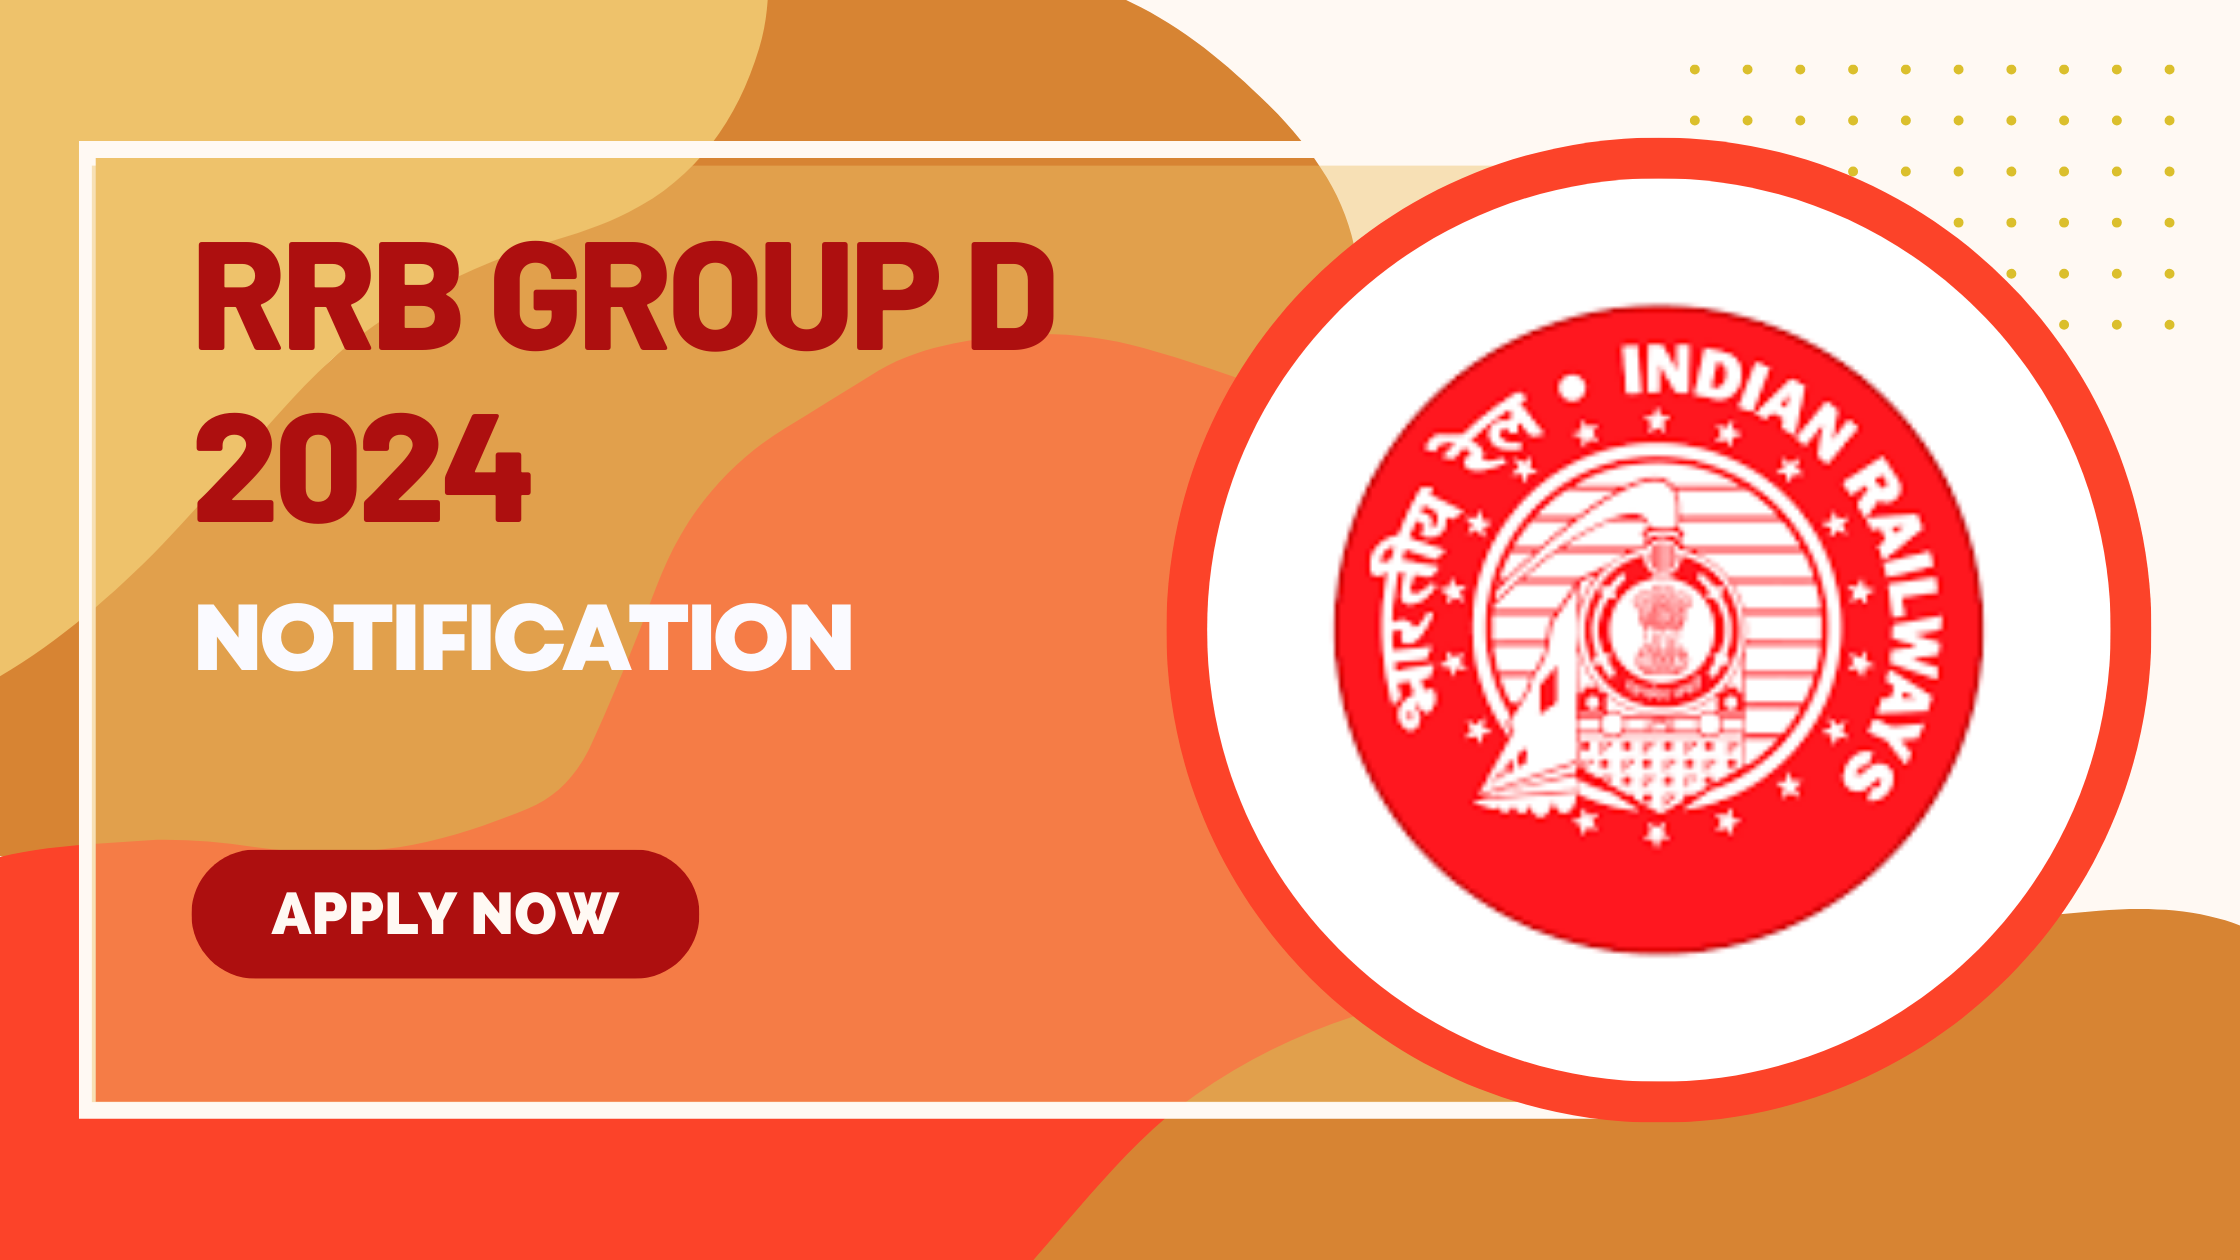 RRB Group D 2024 Notification